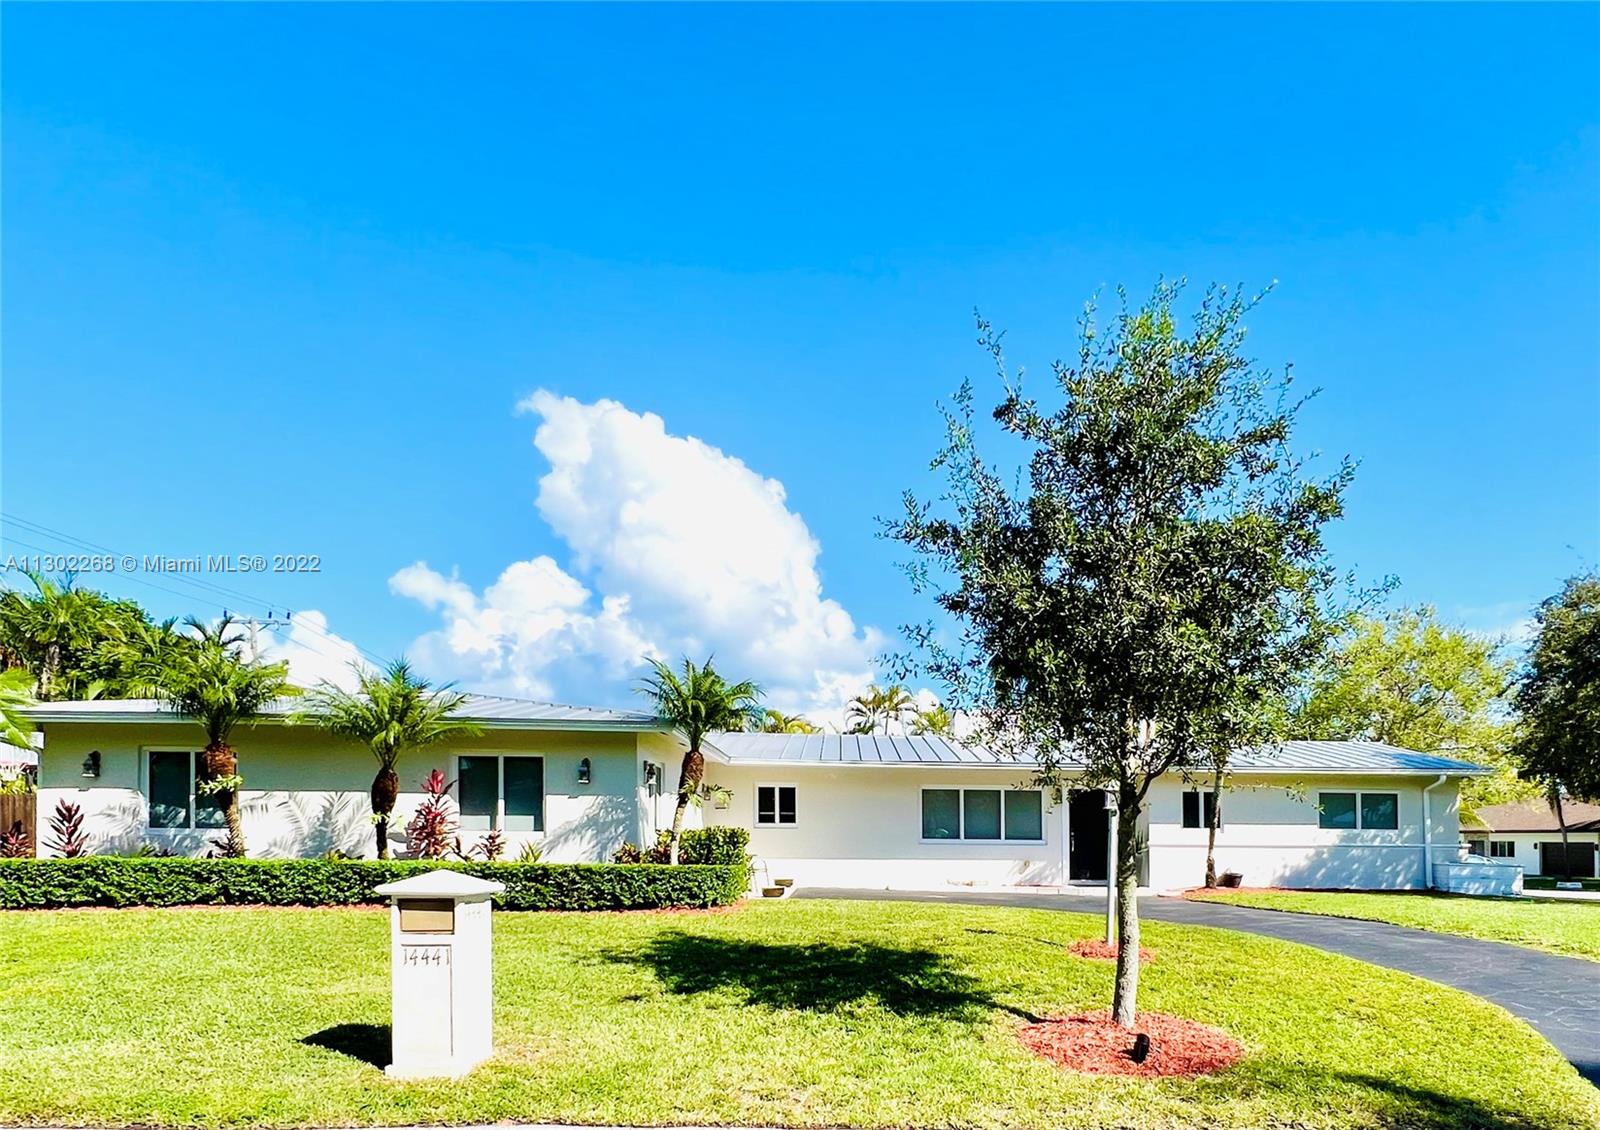 Enjoy real South Florida living in this incredible 3 Bedroom plus Den & 3 Bathroom property within the sought after gated golf cart community of Kings Bay in Coral Gables. This remodeled bright & spacious home includes hurricane impact windows & doors, an aluminum roof, brand new AC's & duct work, a 2 car garage, & a split floor plan with multiple living areas throughout. The gorgeous kitchen features plenty of counter space with a large eat-in island. Relax in an oversized remodeled pool with a newly installed pump & separate jacuzzi. This is a true boaters paradise offering direct access to Deering Bay Marina with 8 community dedicated boat slips & Dock master access daily from 7am-5pm, with 24hr security. Conveniently located near the Dadeland Station and several highway access points.